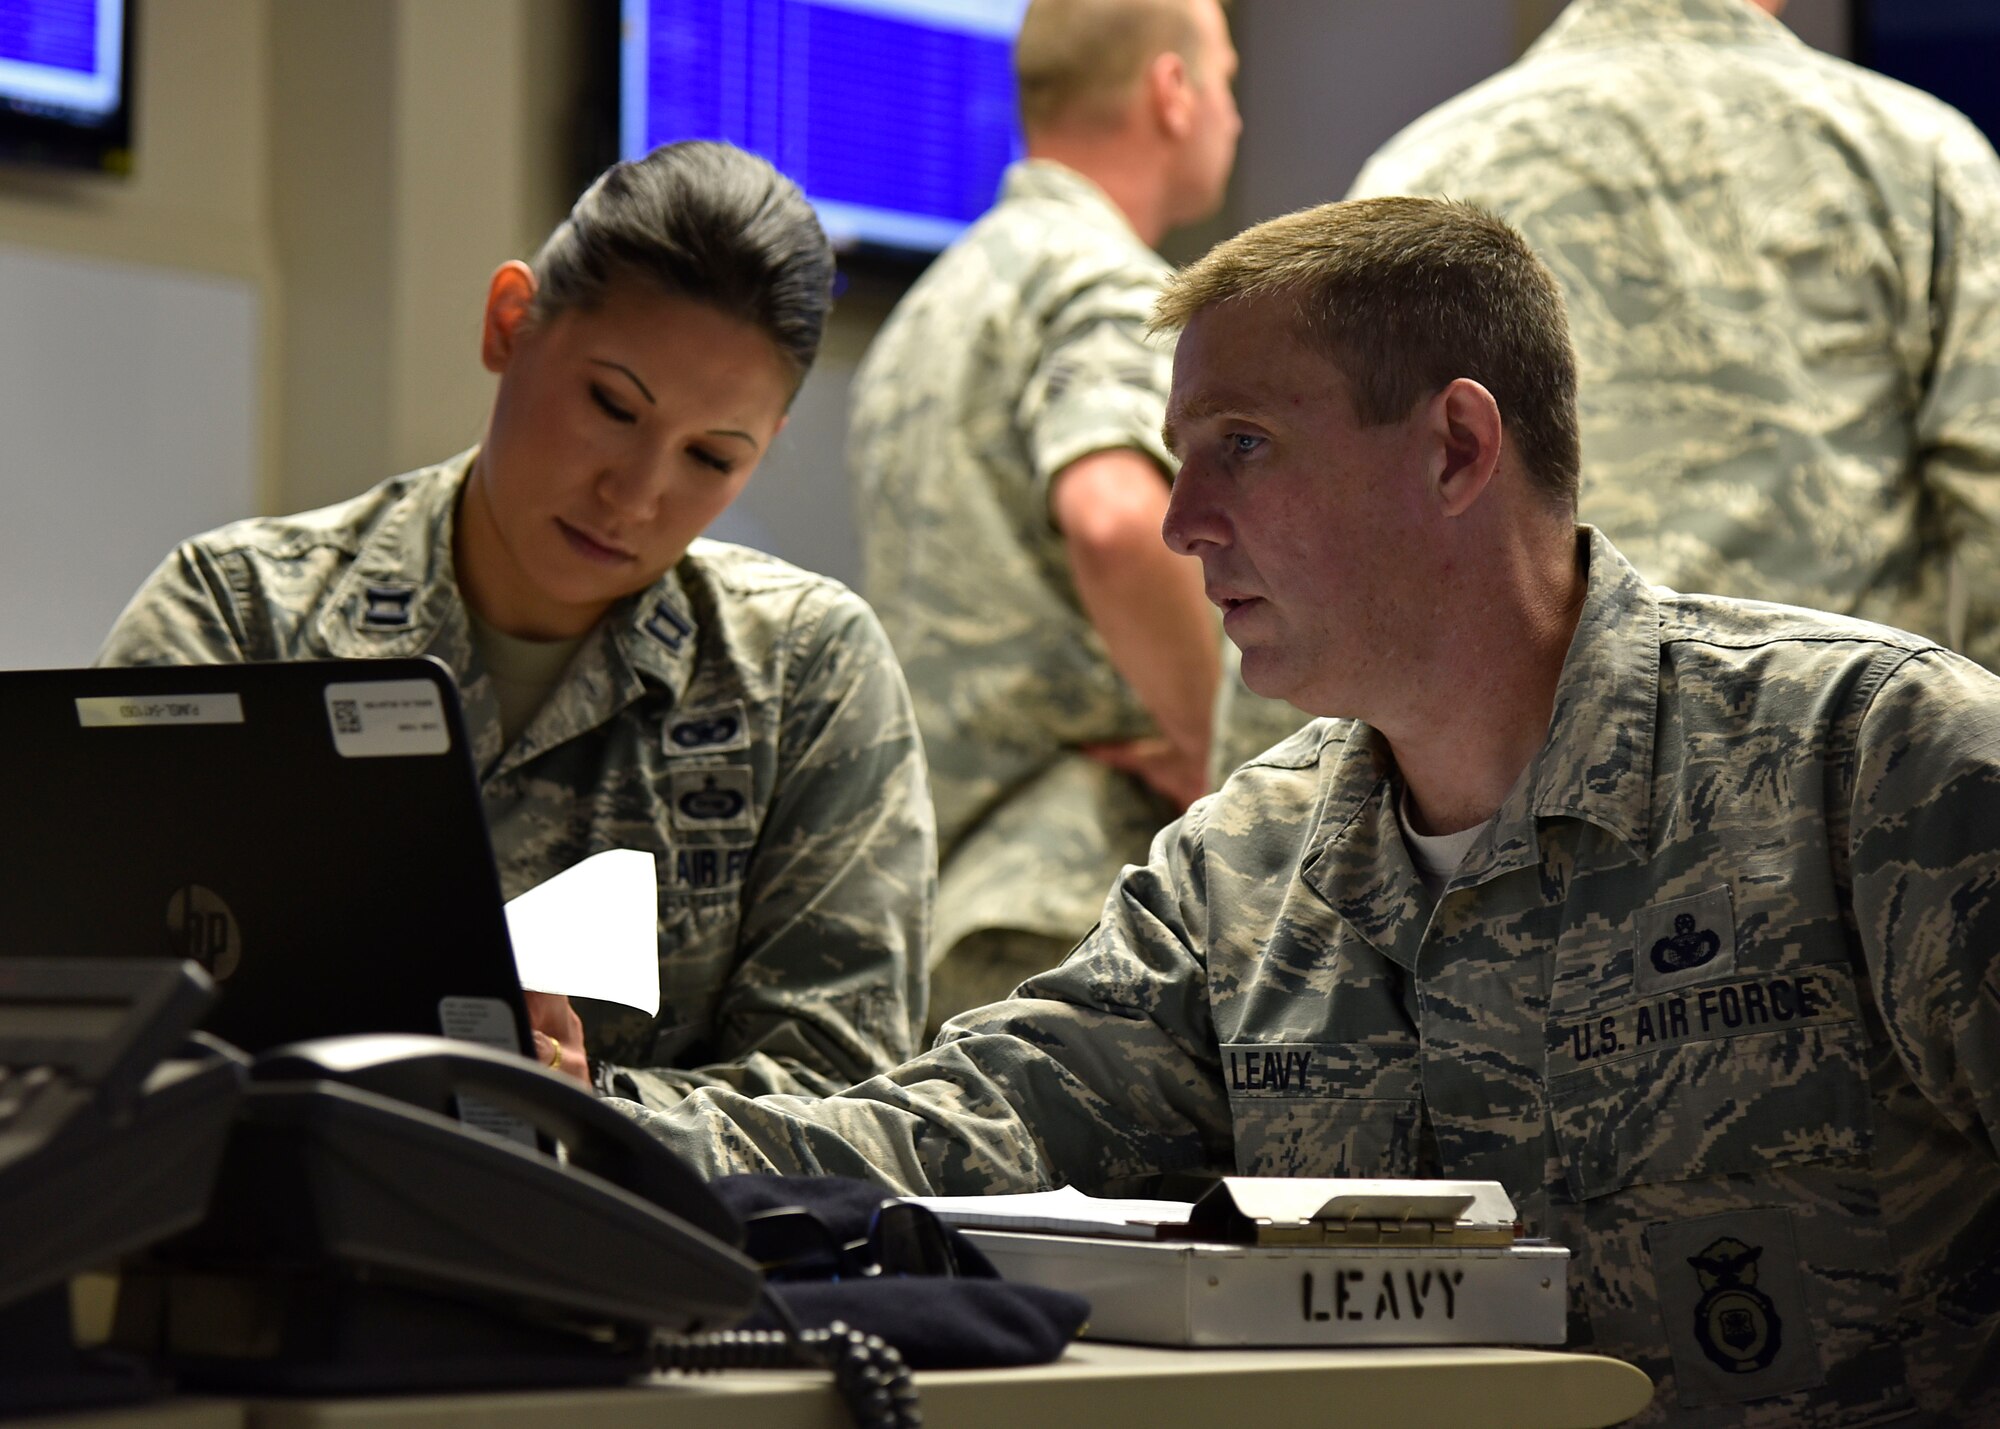 (From left) Air Force Capt. Elisa P. Shutler, 175th Security Forces Squadron deputy commander, and Air Force Chief Master Sgt. Kevin P. Leavy, 175th SFS manager, work on taking full accountability of base Airmen June 22, 2017, in the emergency operations center at Warfield Air National Guard Base, Middle River, Md. They were participating in an active shooter training exercise held on base. (U.S. Air National Guard photo by Airman Sarah M. McClanahan)